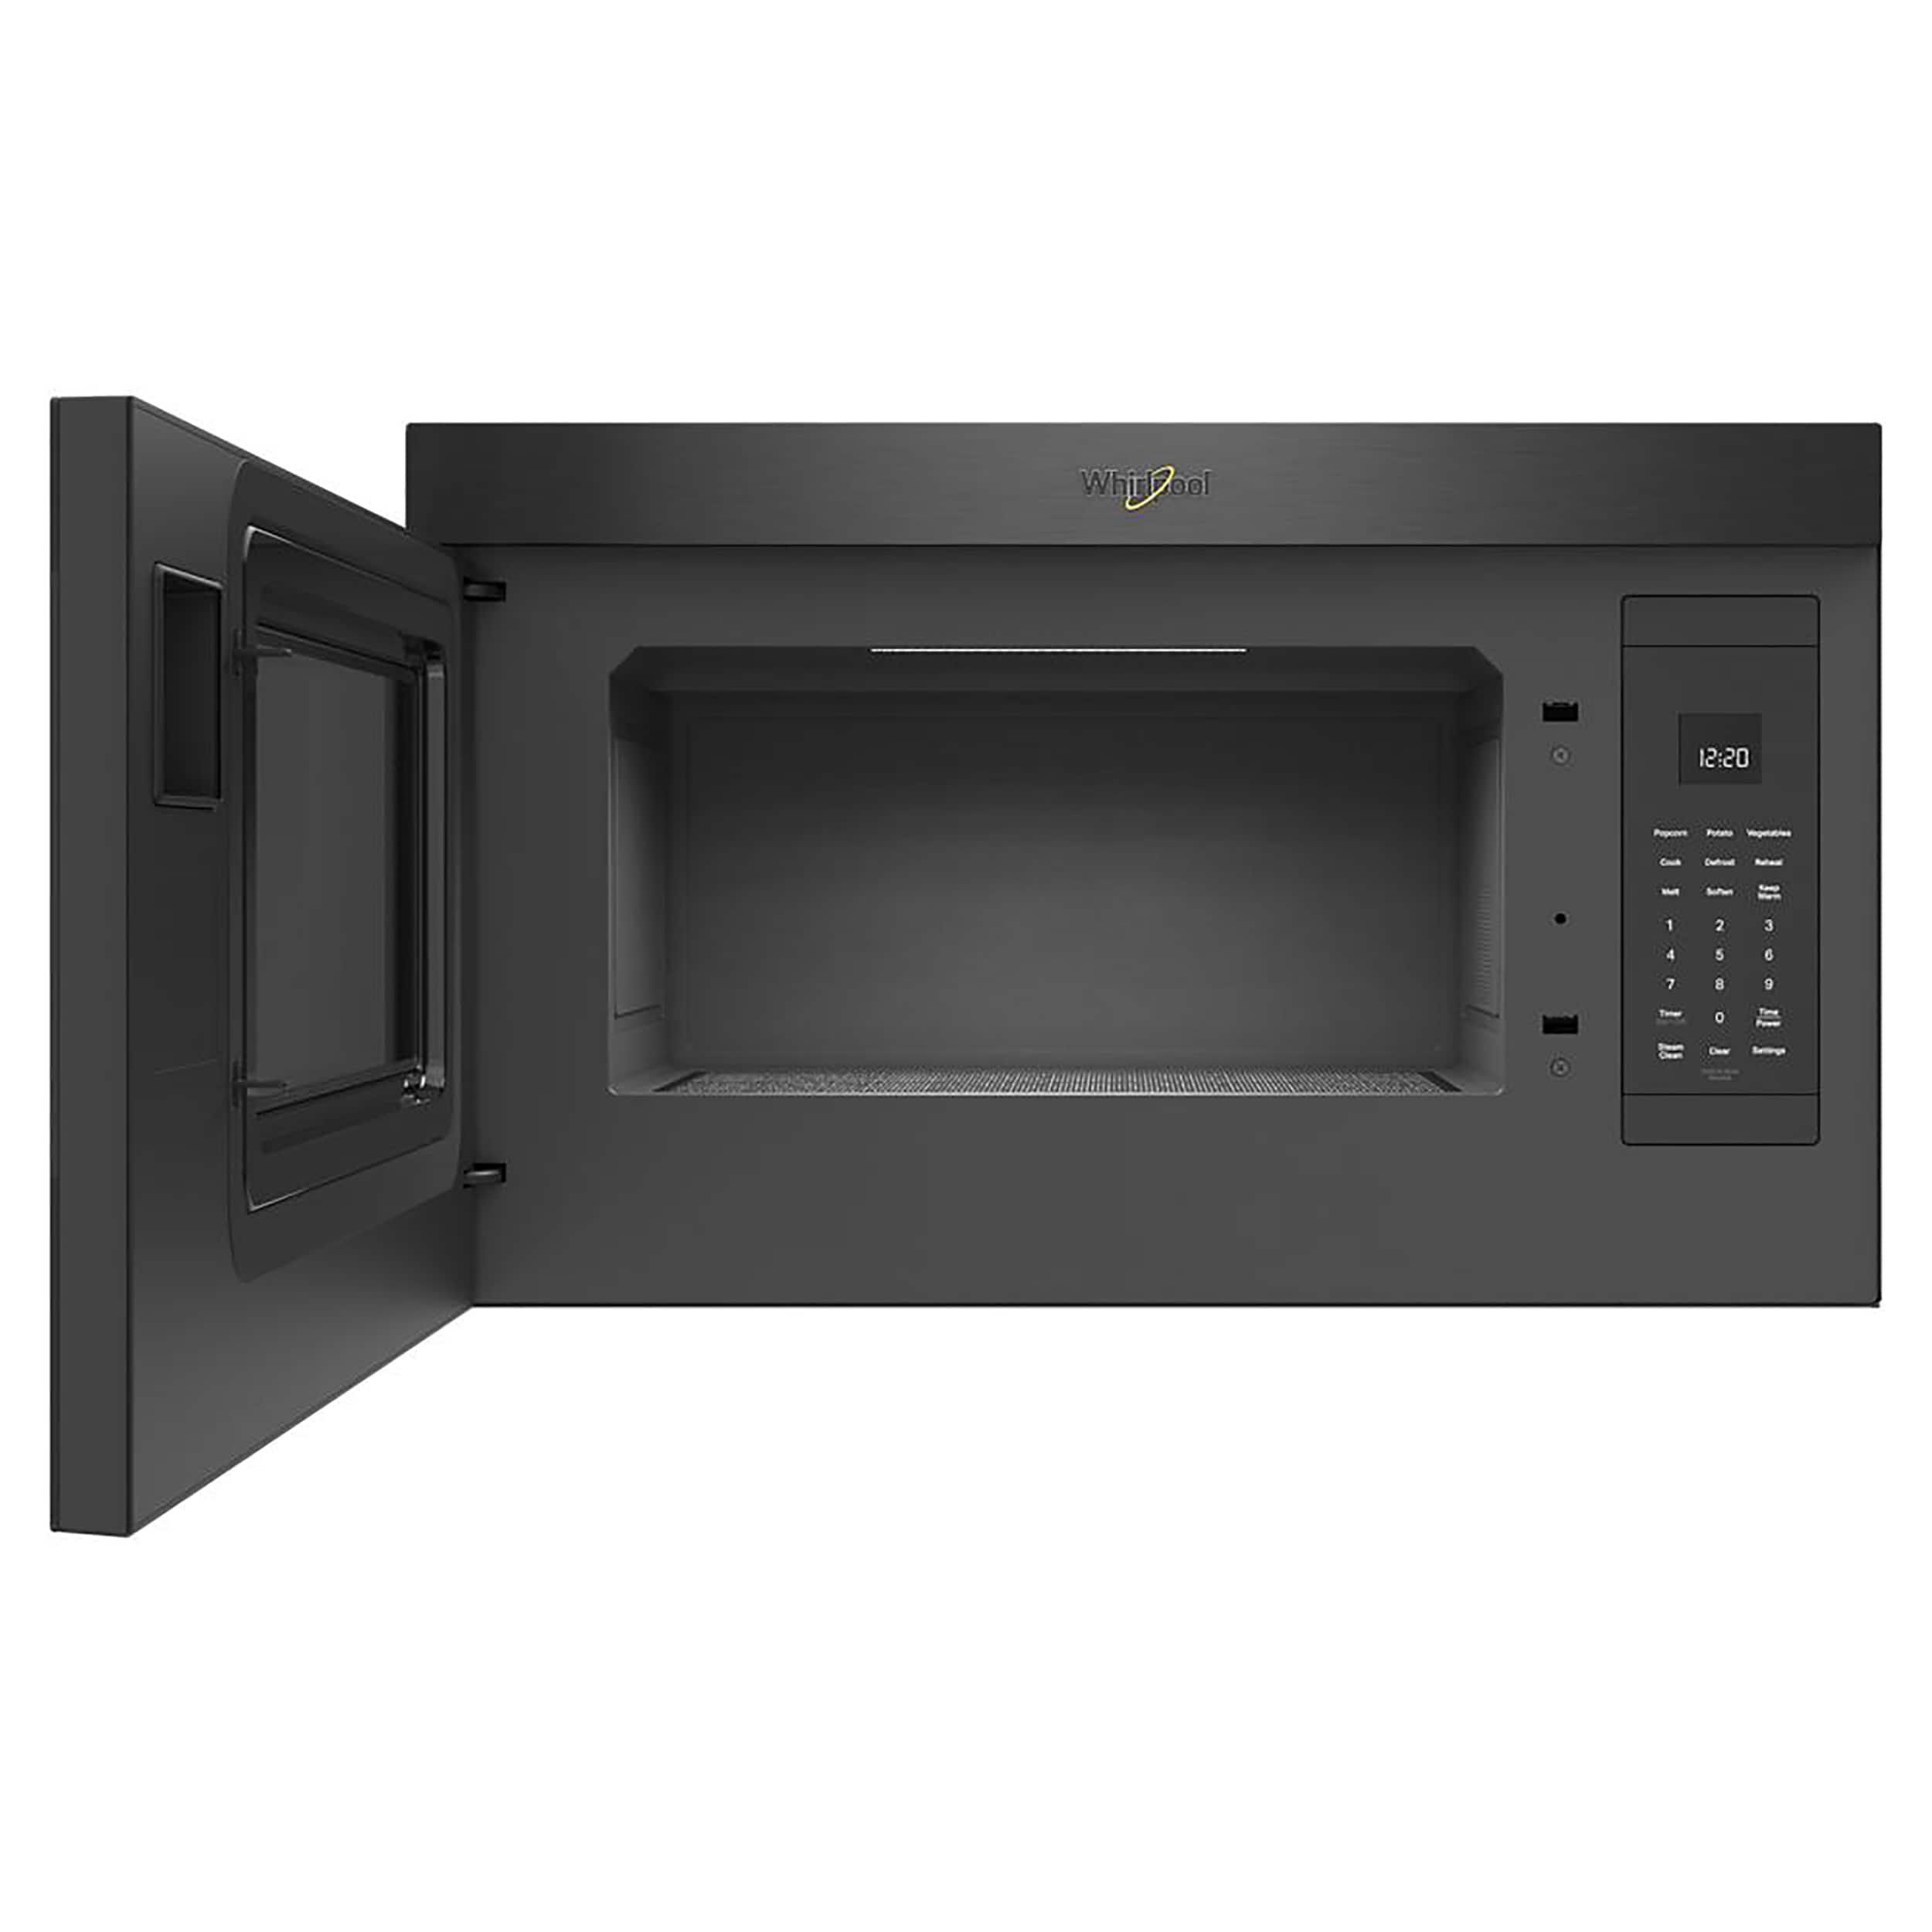 Whirlpool 1.1 Cu. Ft. Low Profile Over-the-Range Microwave Hood Combination  Stainless Steel WML55011HS - Best Buy